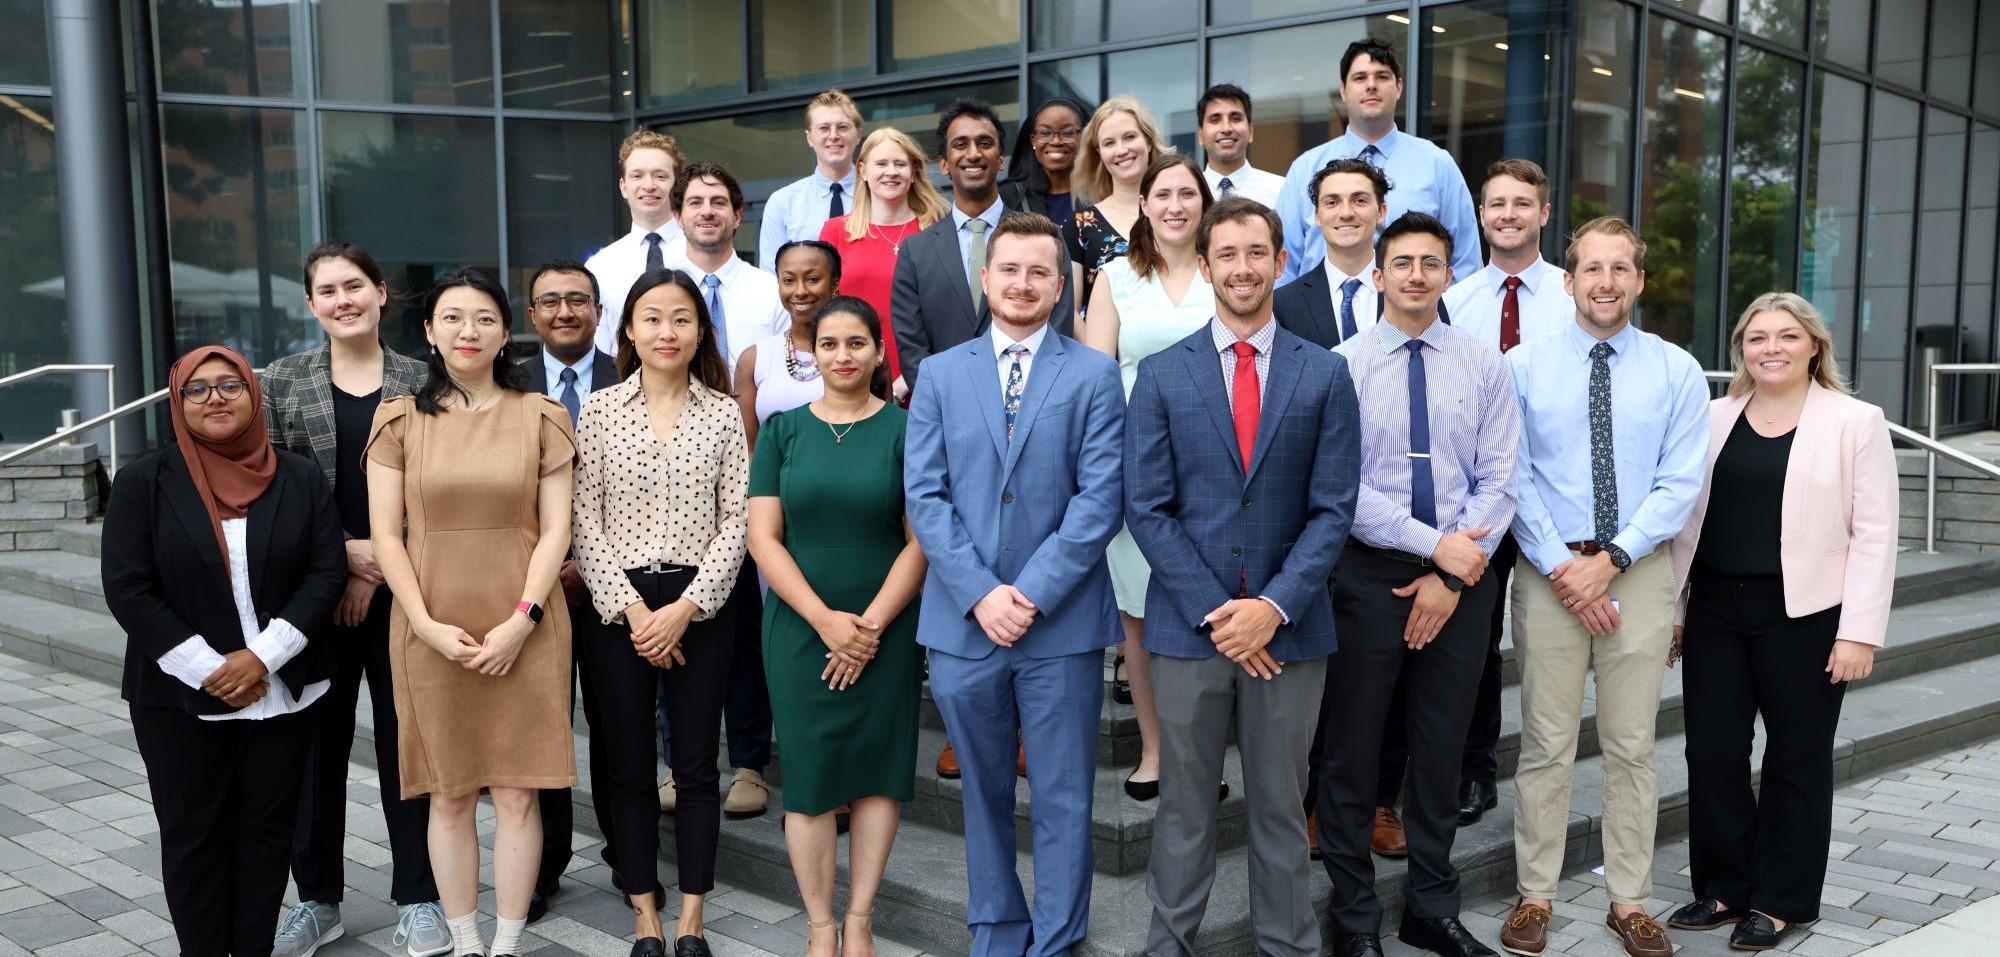 A group of new resident physicians for the EVMS Internal Medicine Residency Program wearing business casual clothing and smiling for the camera on the steps of Waitzer Hall.